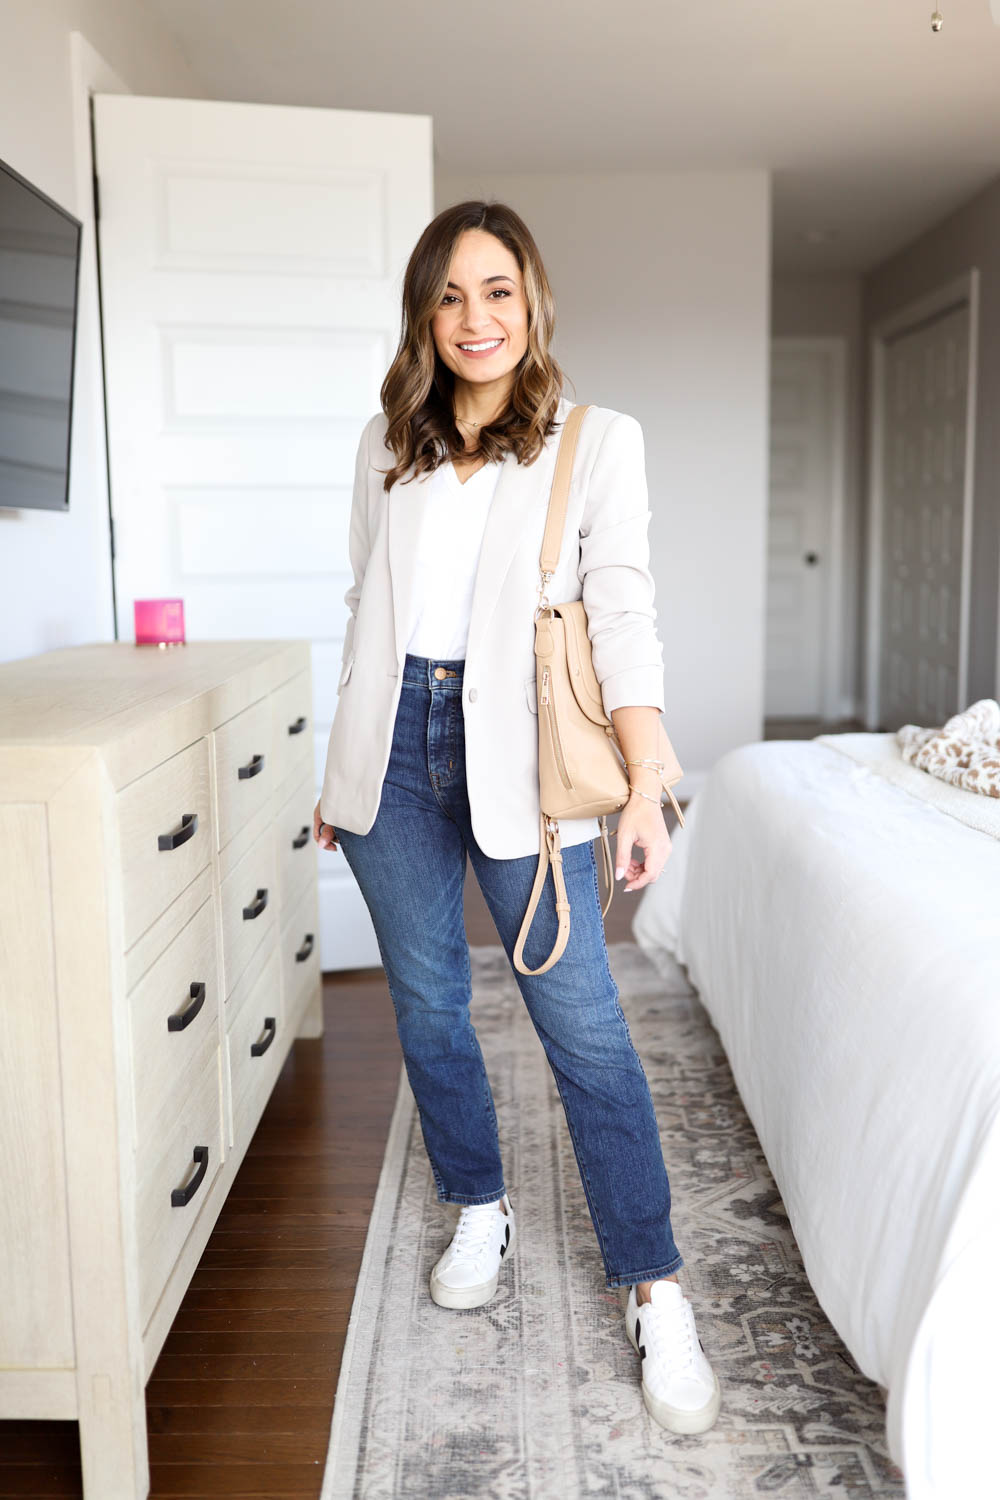 Express acceptabel Let Outfits for Work With Jeans - Pumps & Push Ups